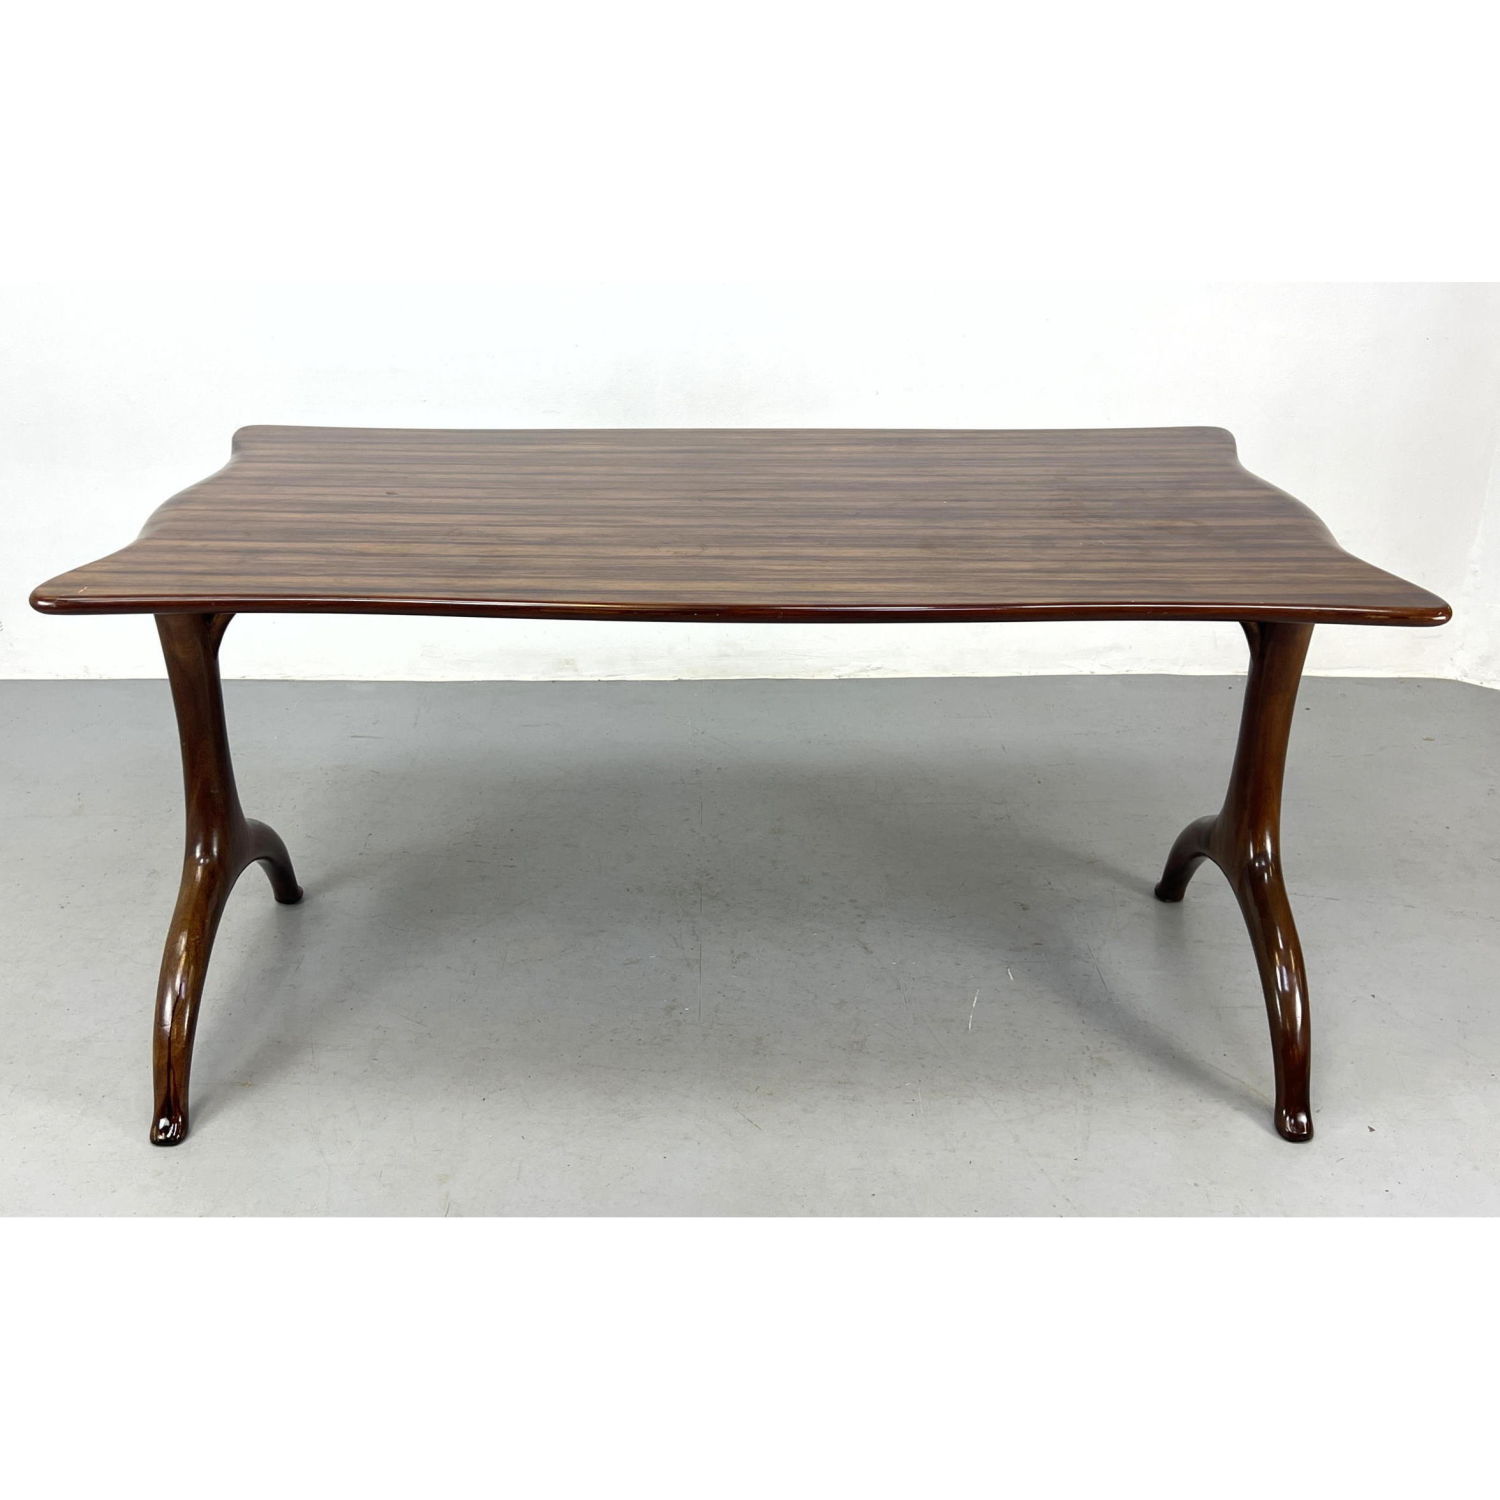 Designer Exotic Wood Dining Table.